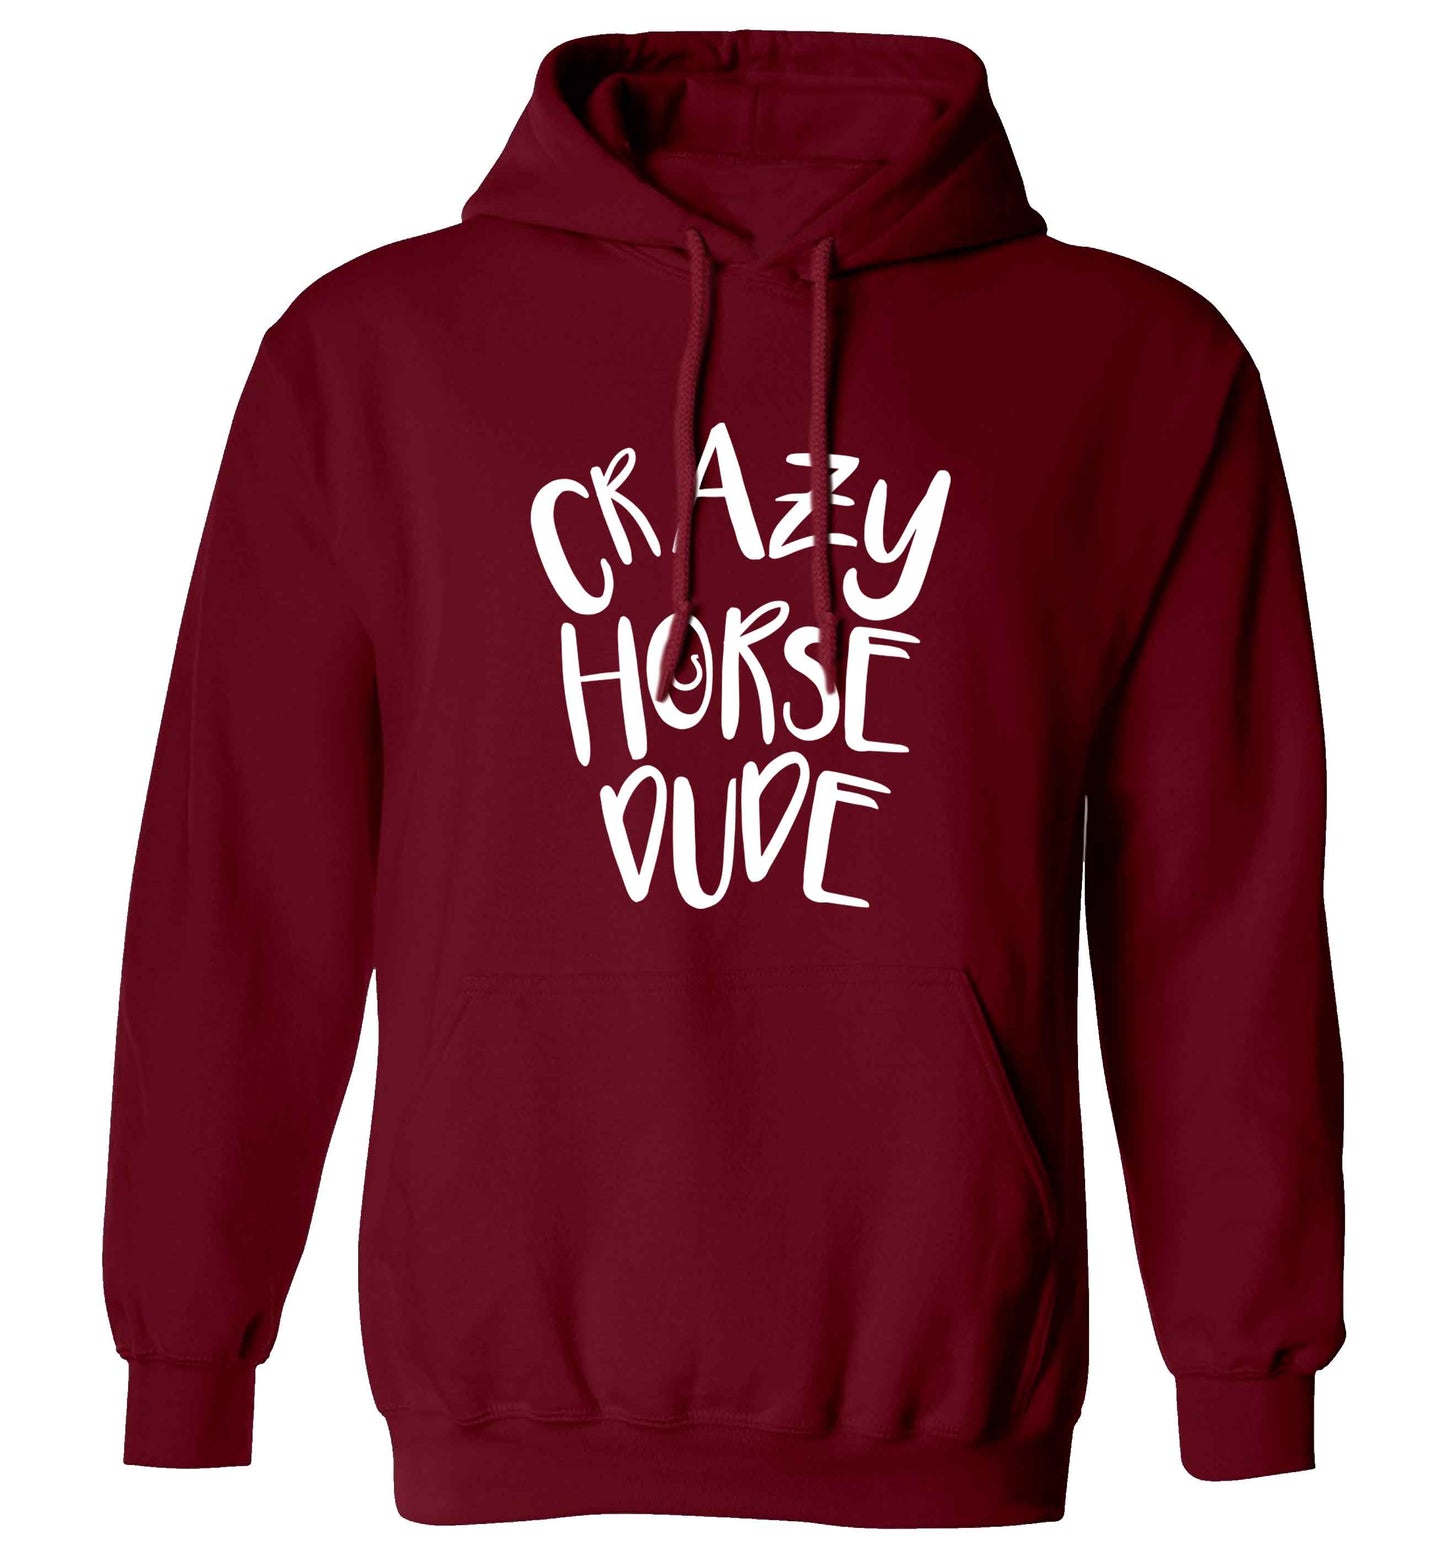 Crazy horse dude adults unisex maroon hoodie 2XL